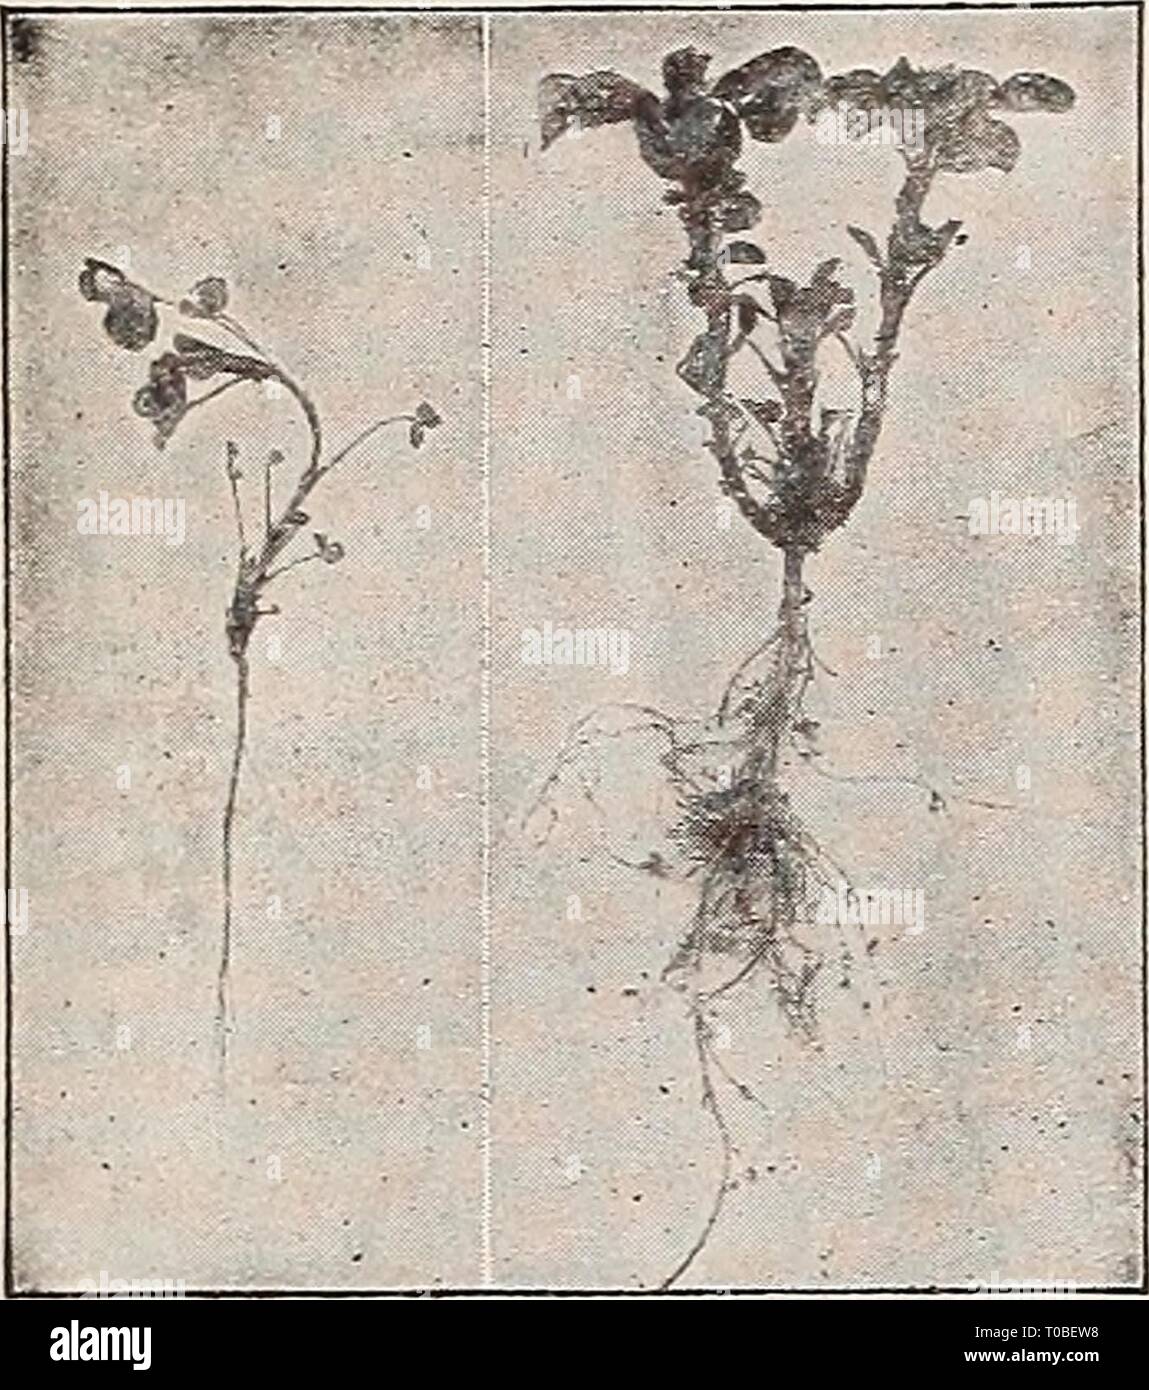 Dreer's garden book 1917 (1917) Dreer's garden book 1917 dreersgardenbook1917henr Year: 1917  50 Or [HfflKTADRBR fflllADELPIflA-^M GARDEh REQUISITES- Inoculating Cultures for Leguminous Crops NITROGEN GATHERING BACTERIA FOR    ALFALFA CRIMSON CLOVER SWEET CLOVER WHITE CLOVER RED CLOVER ALS1KE CLOVER SWEET PEAS GARDEN PEAS GARDEN BEANS LIMA BEANS VELVET BEANS LUPINS Uninoculated ALFALFA Inoculated BURR CLOVER COW PEAS SOY BEANS CANADA FIELD PEAS PEANUTS VETCH And all other pod-growing plants called legumes, enrich the soil through the action of bacteria growing upon their roots. These bacteria  Stock Photo